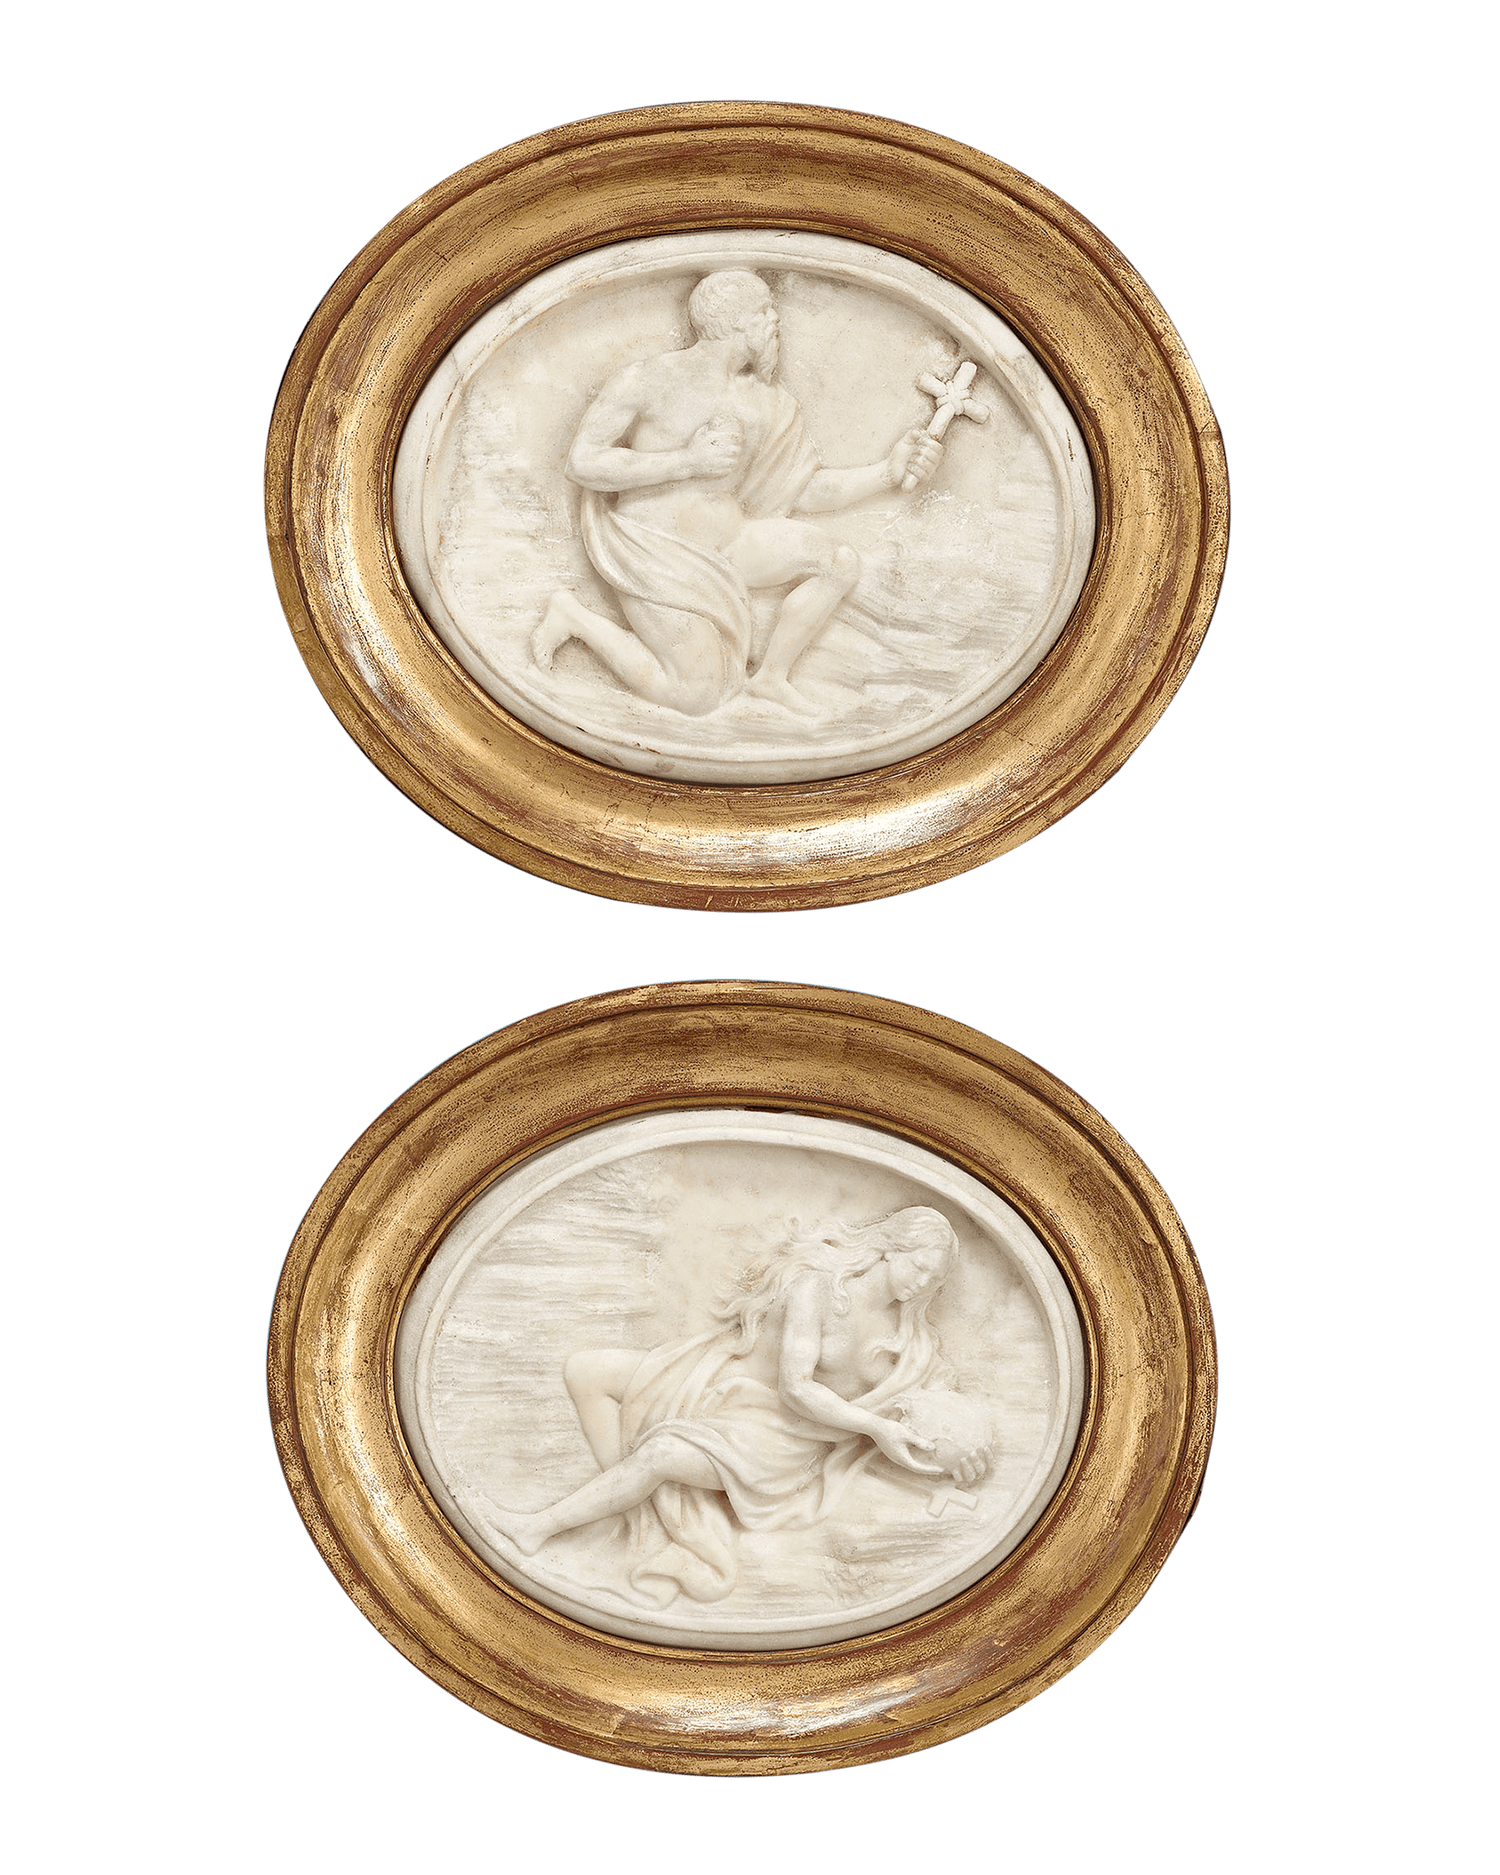 These remarkable marble carved plaques depict St. Jerome and Mary Magdalene